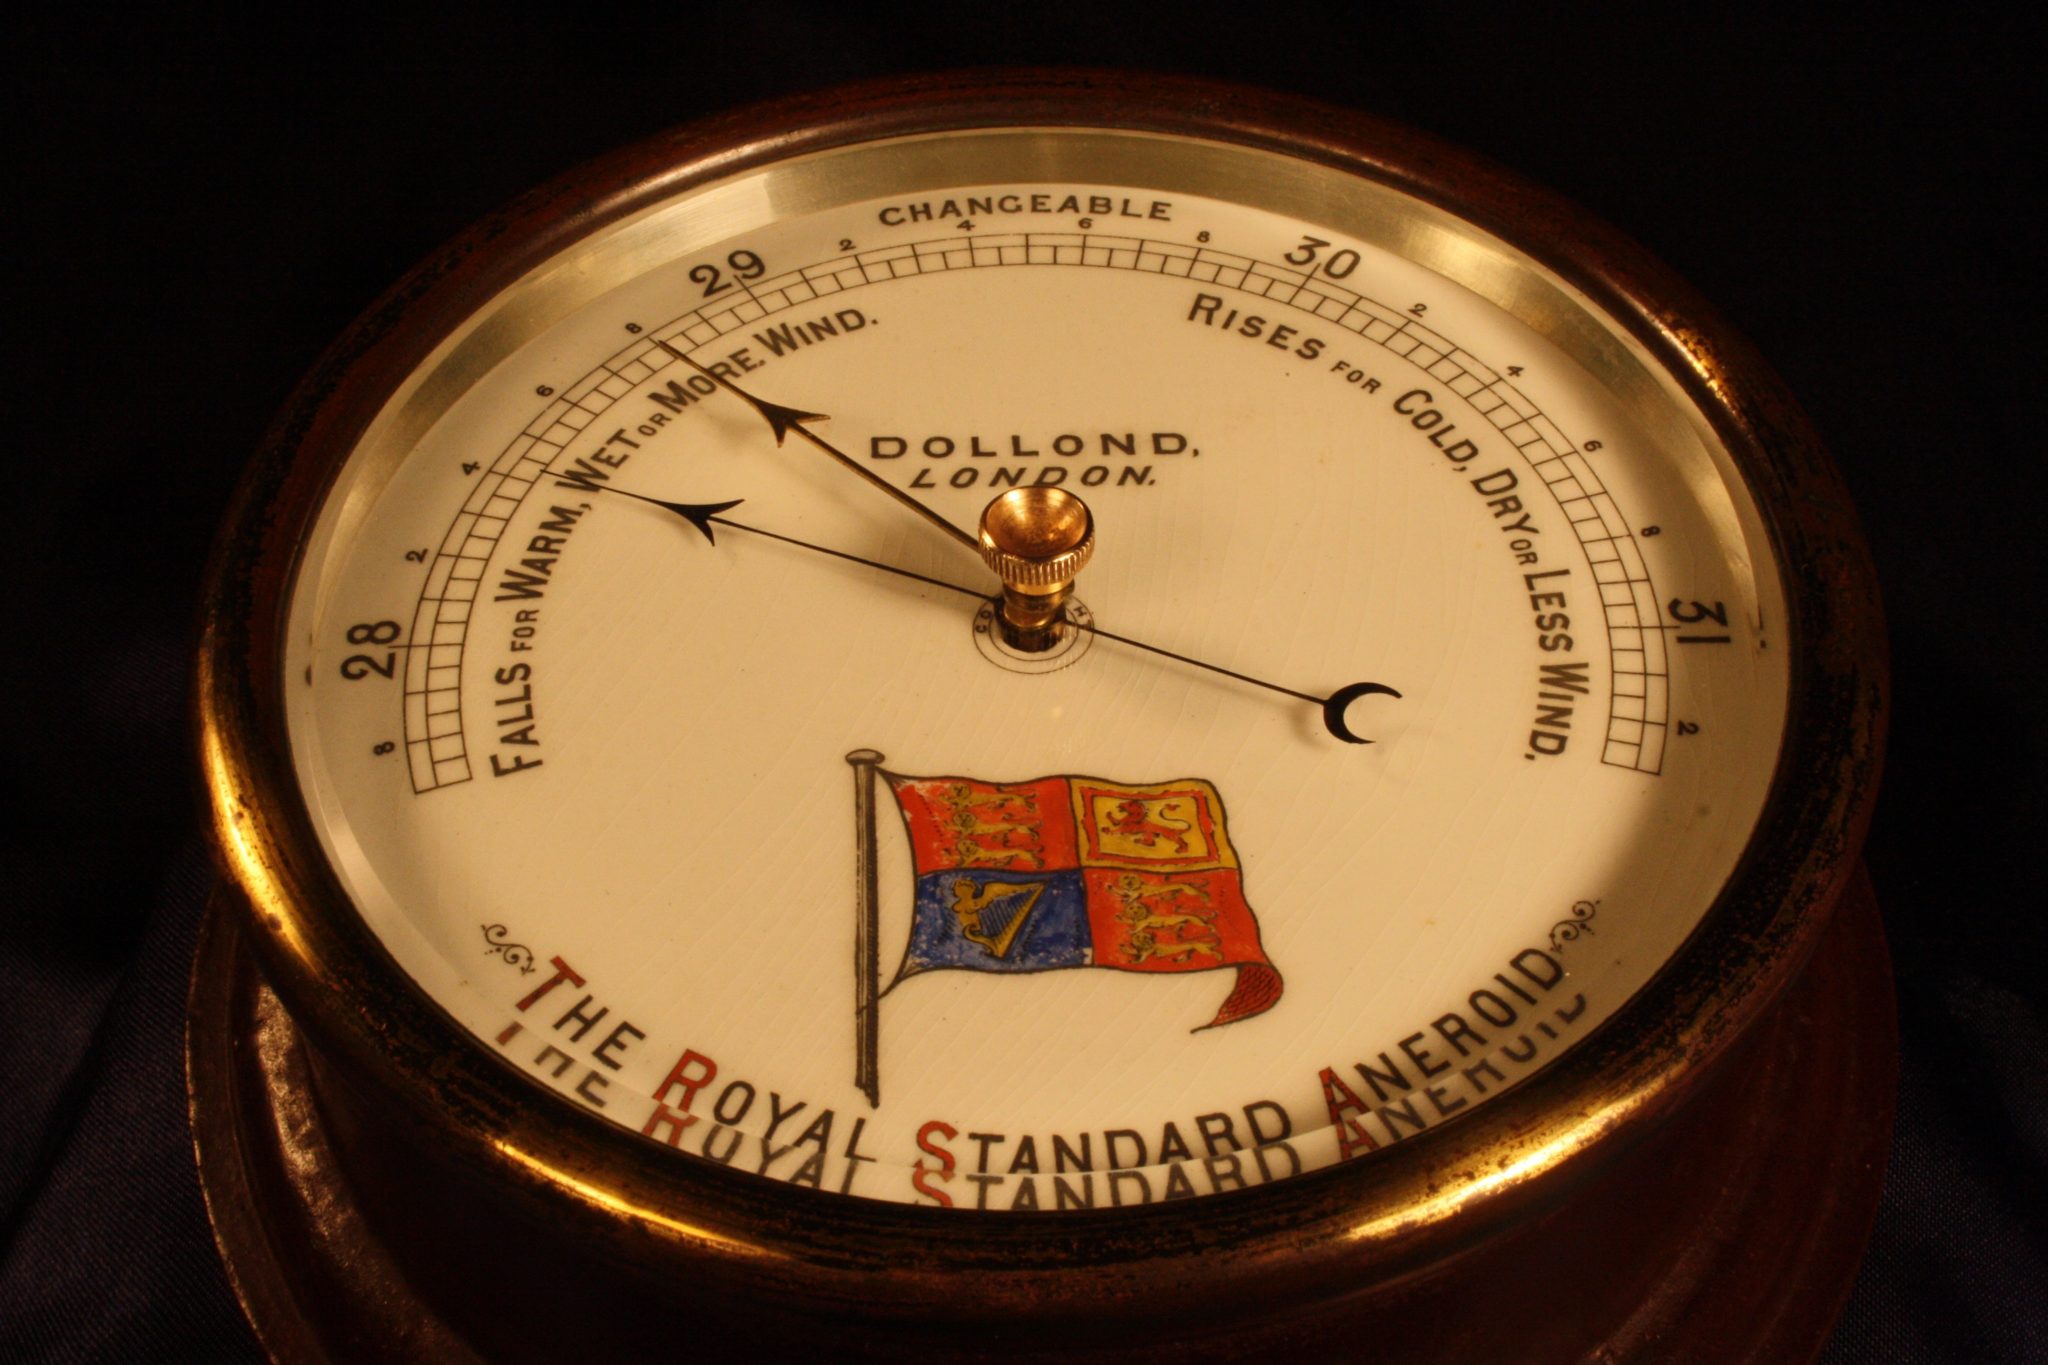 THE ROYAL STANDARD ANEROID MARINE BAROMETER BY DOLLOND c1880